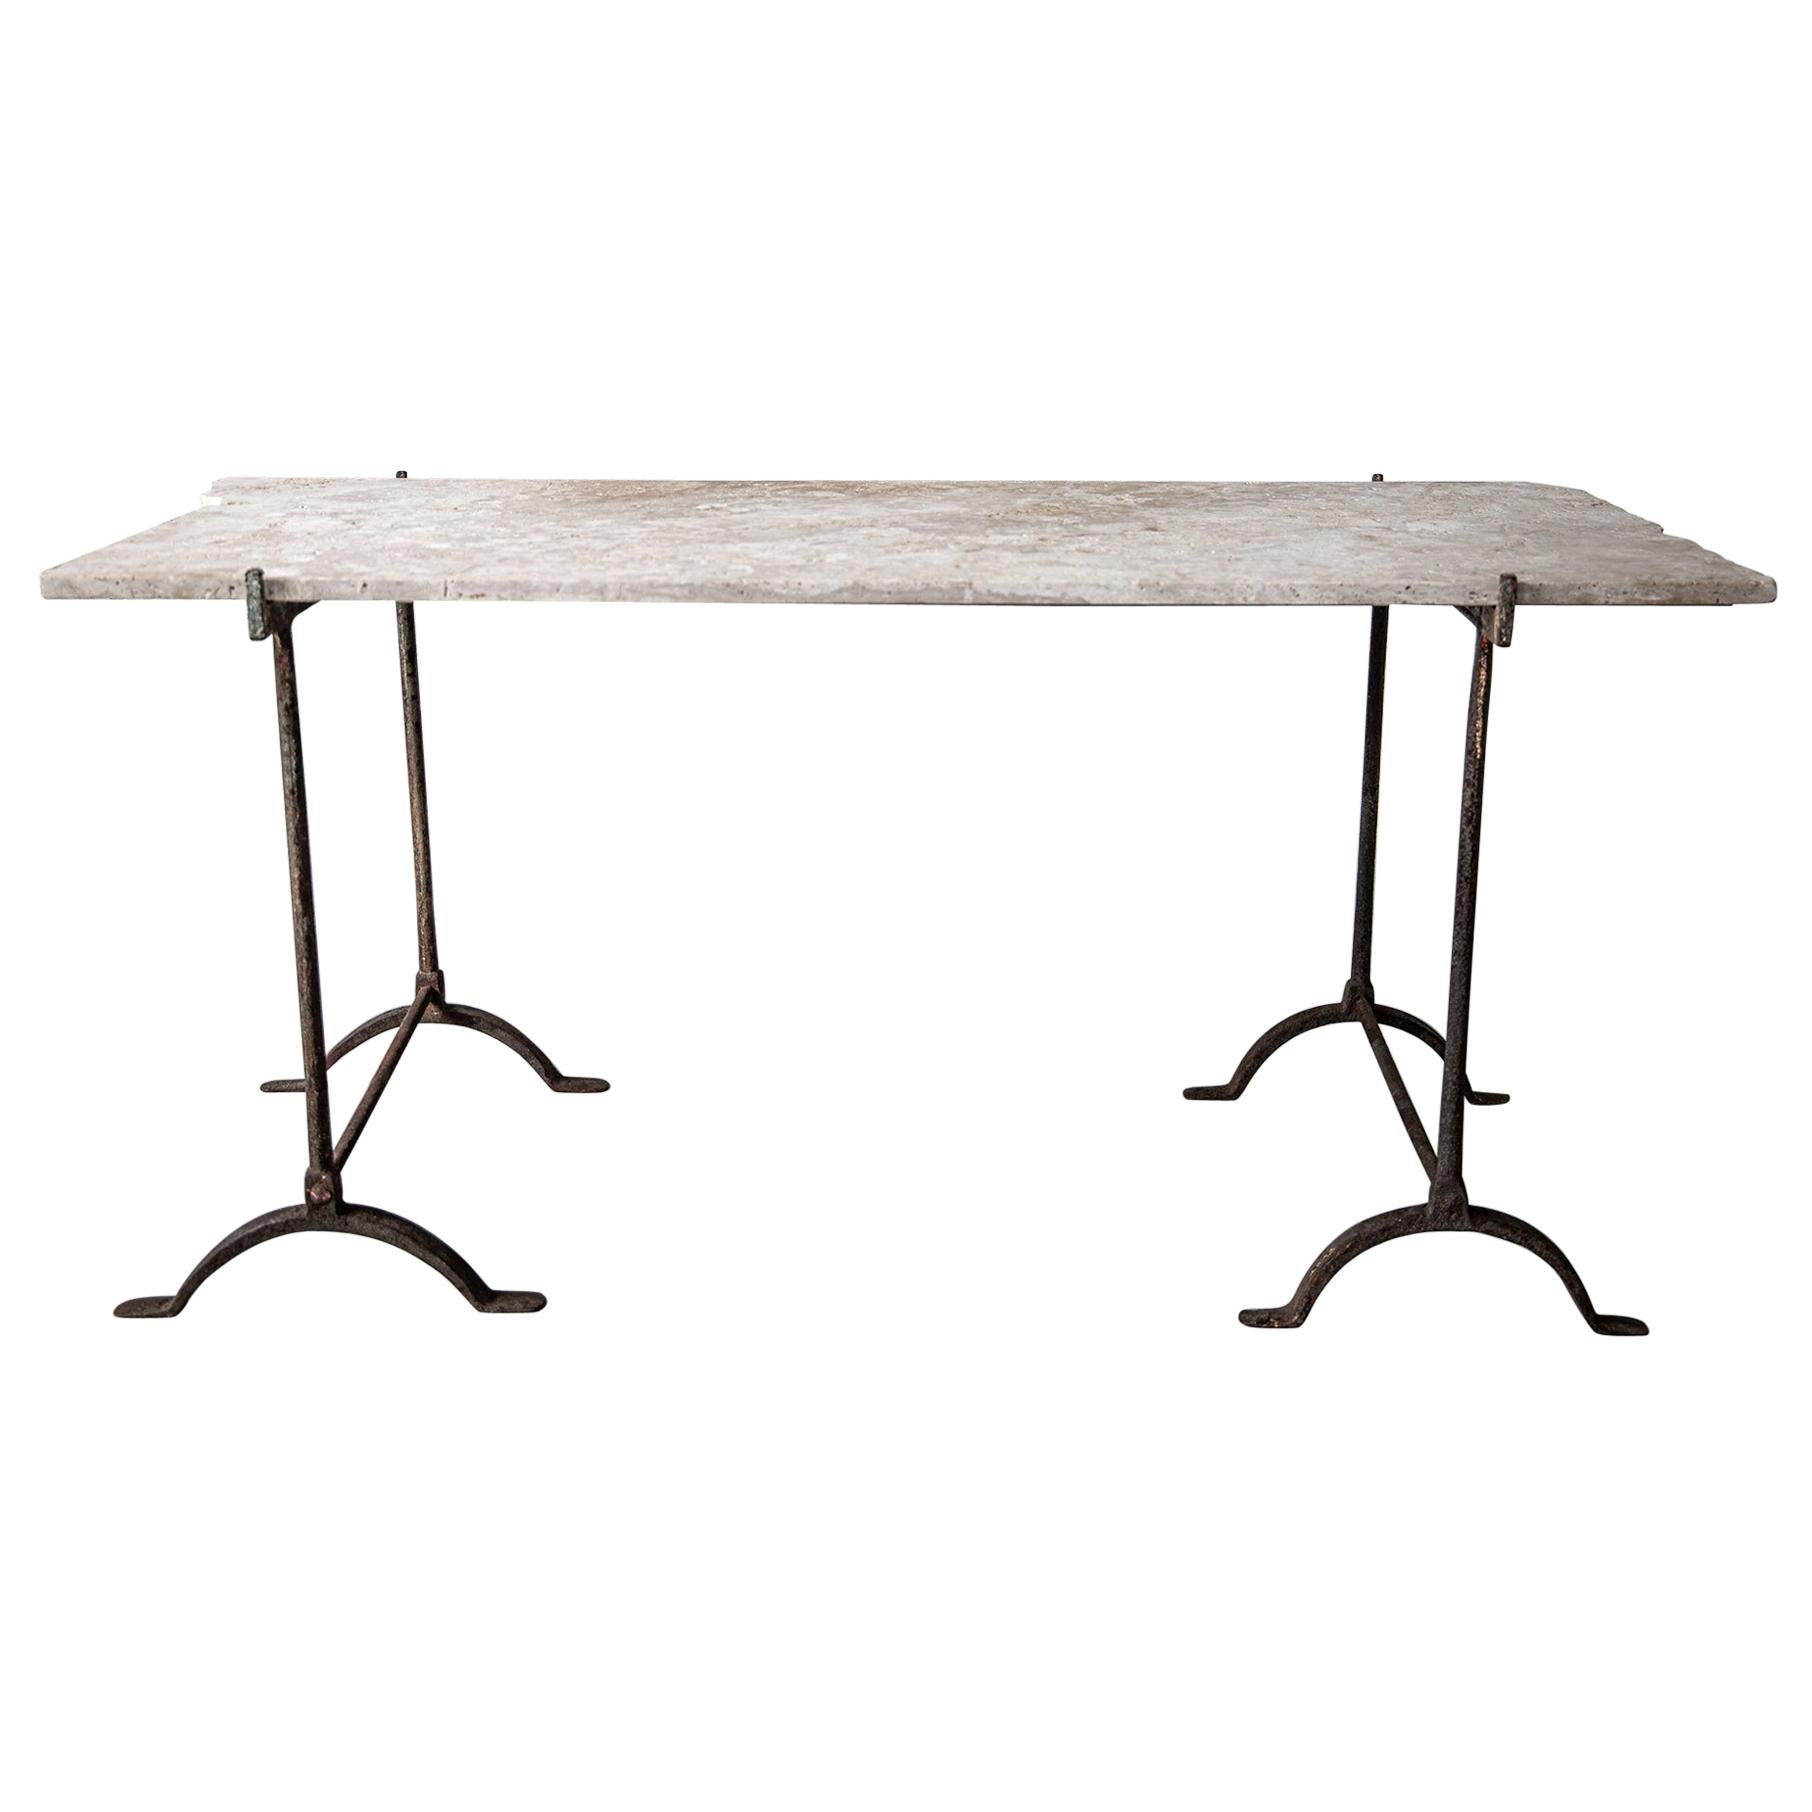 Fragment Trestle Series Desk/Table by Toad, 2022 Contemporary Edition For Sale